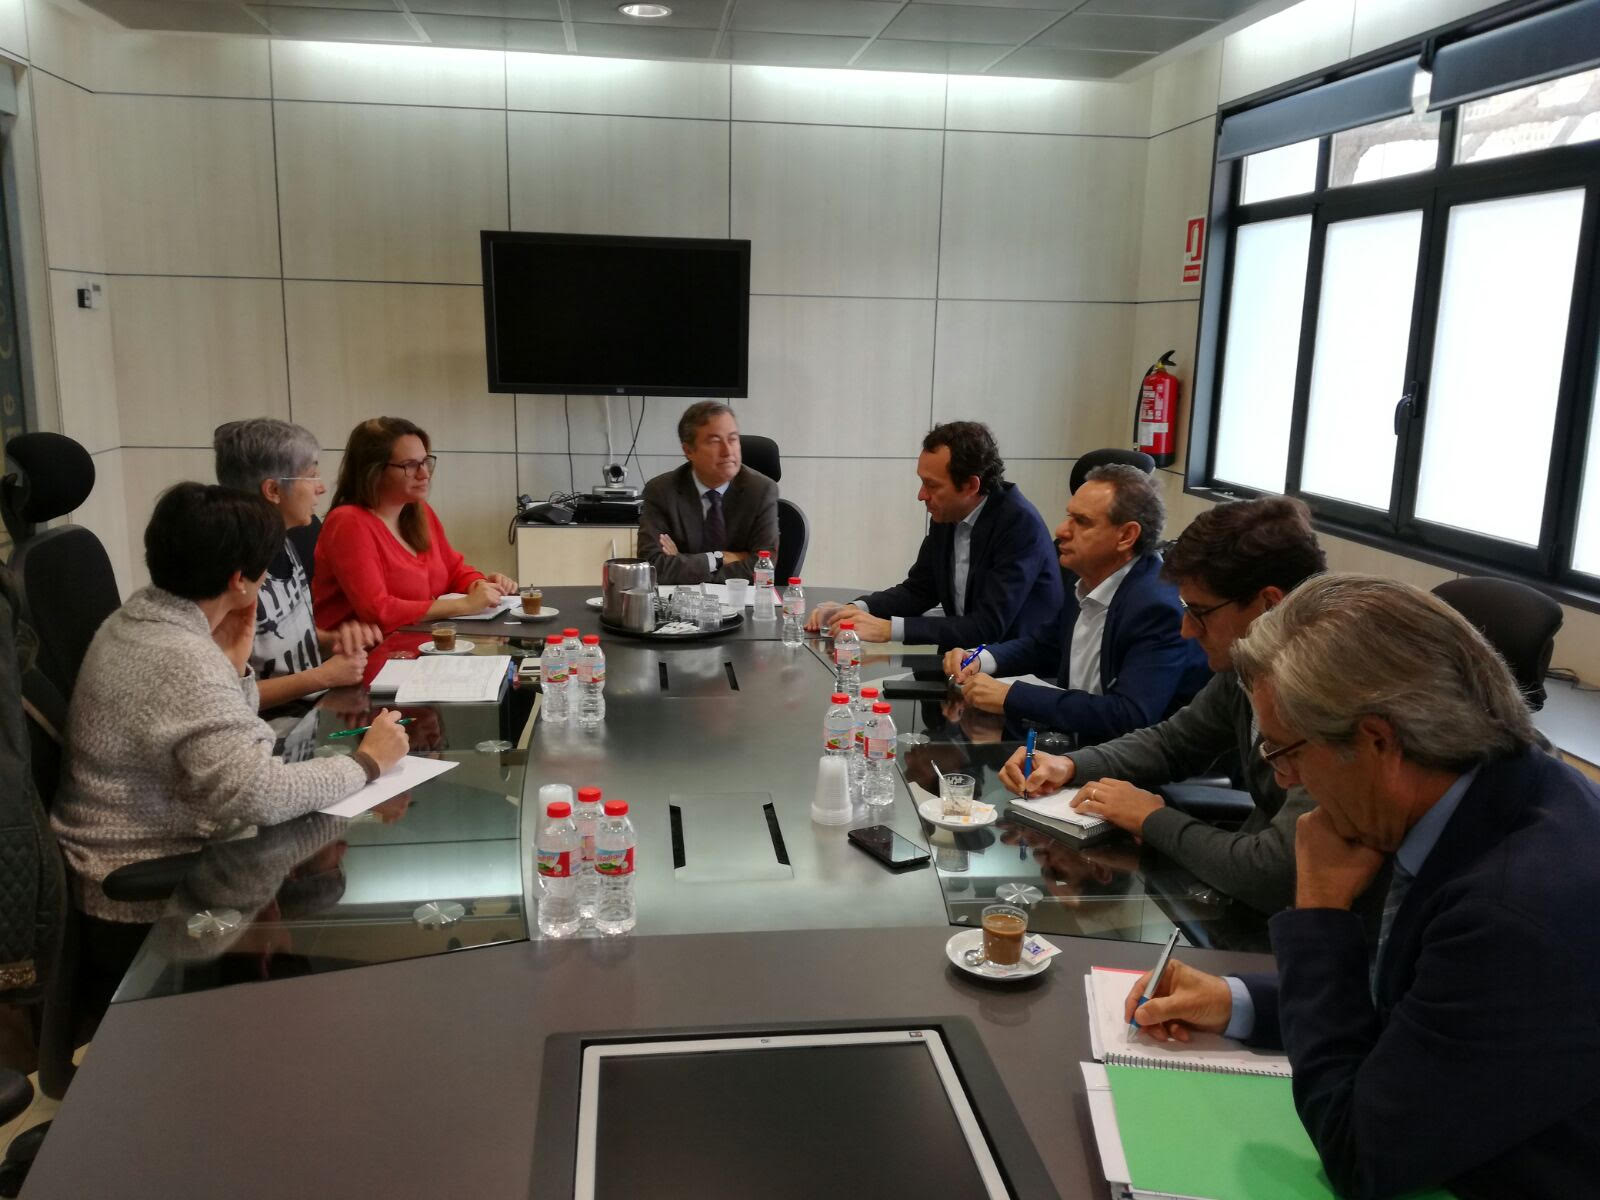 PortsIB, the Port Authority and the Ciutadella and Mahon city councils meet to coordinate activity in the two ports